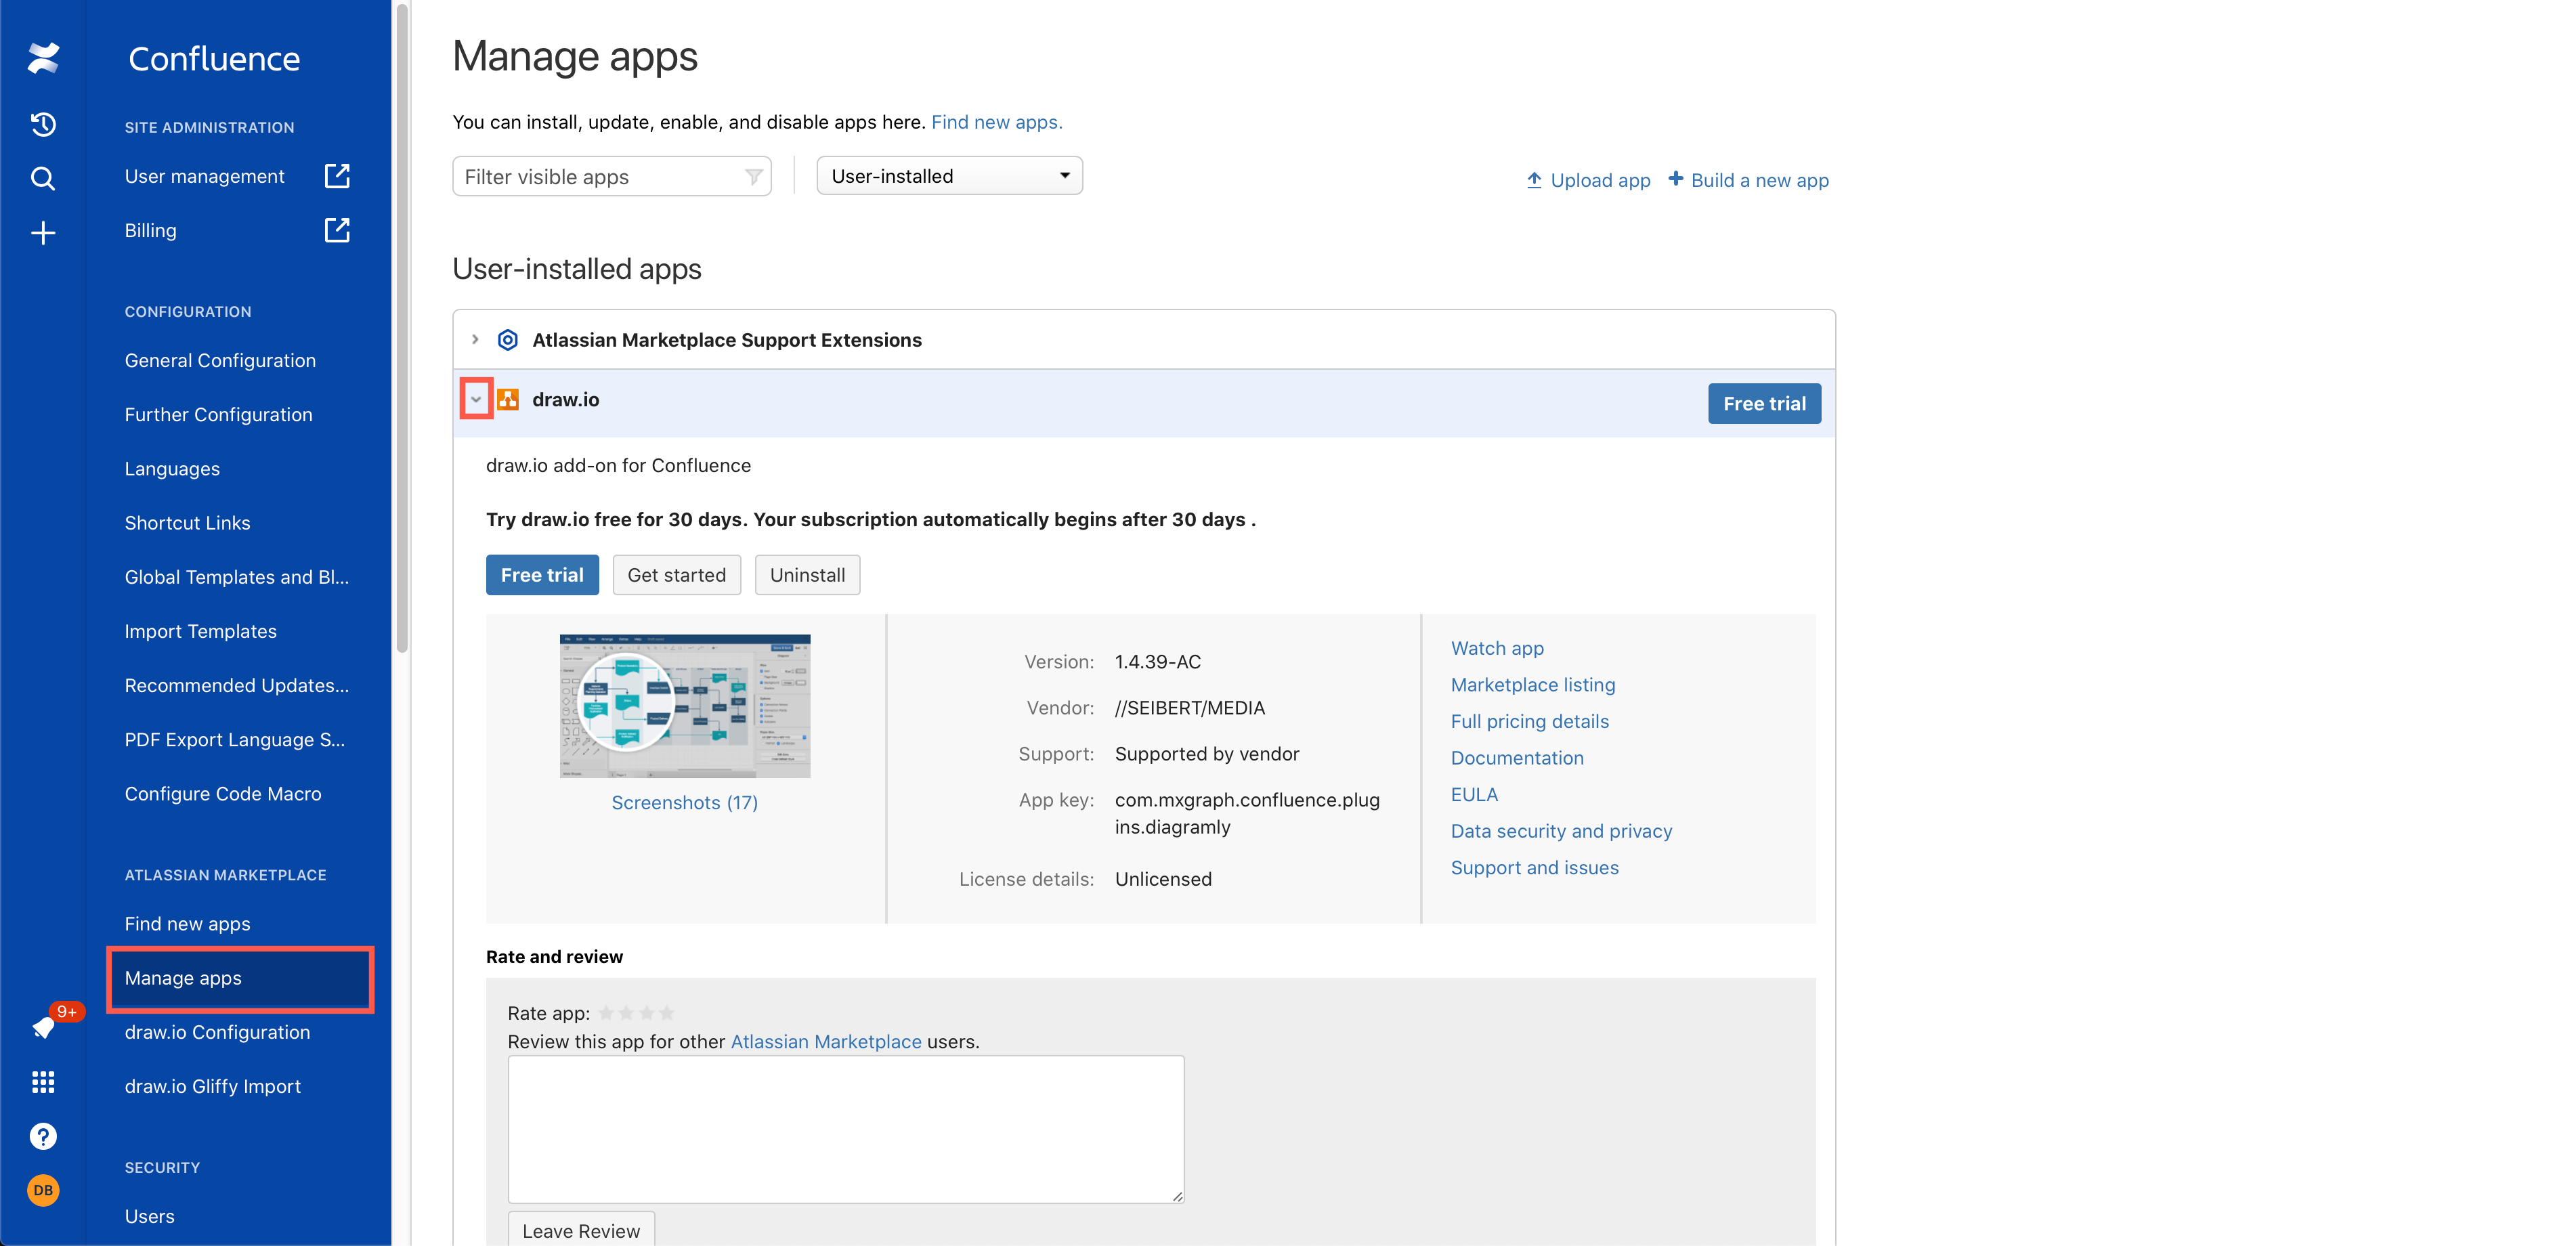 Manage the draw.io app in the Confluence Cloud Settings as an administrator